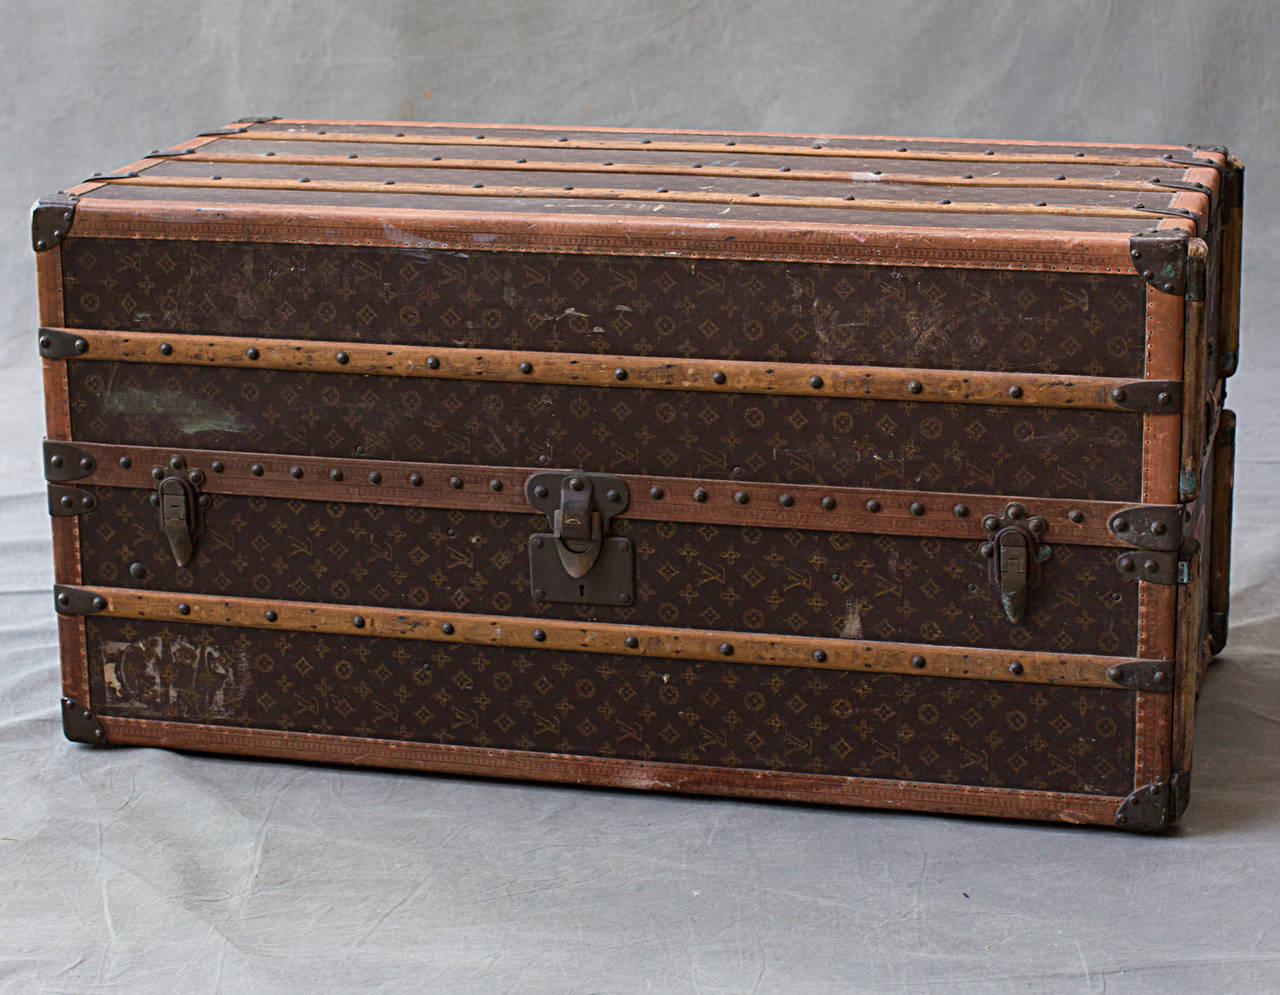 Single family owned wardrobe originally purchased in Paris in 1924. This incredible trunk has made several voyages across the Atlantic with its last in 1974. Interior retains original trays, removable case, hangers, and dust cover. Interior canvas